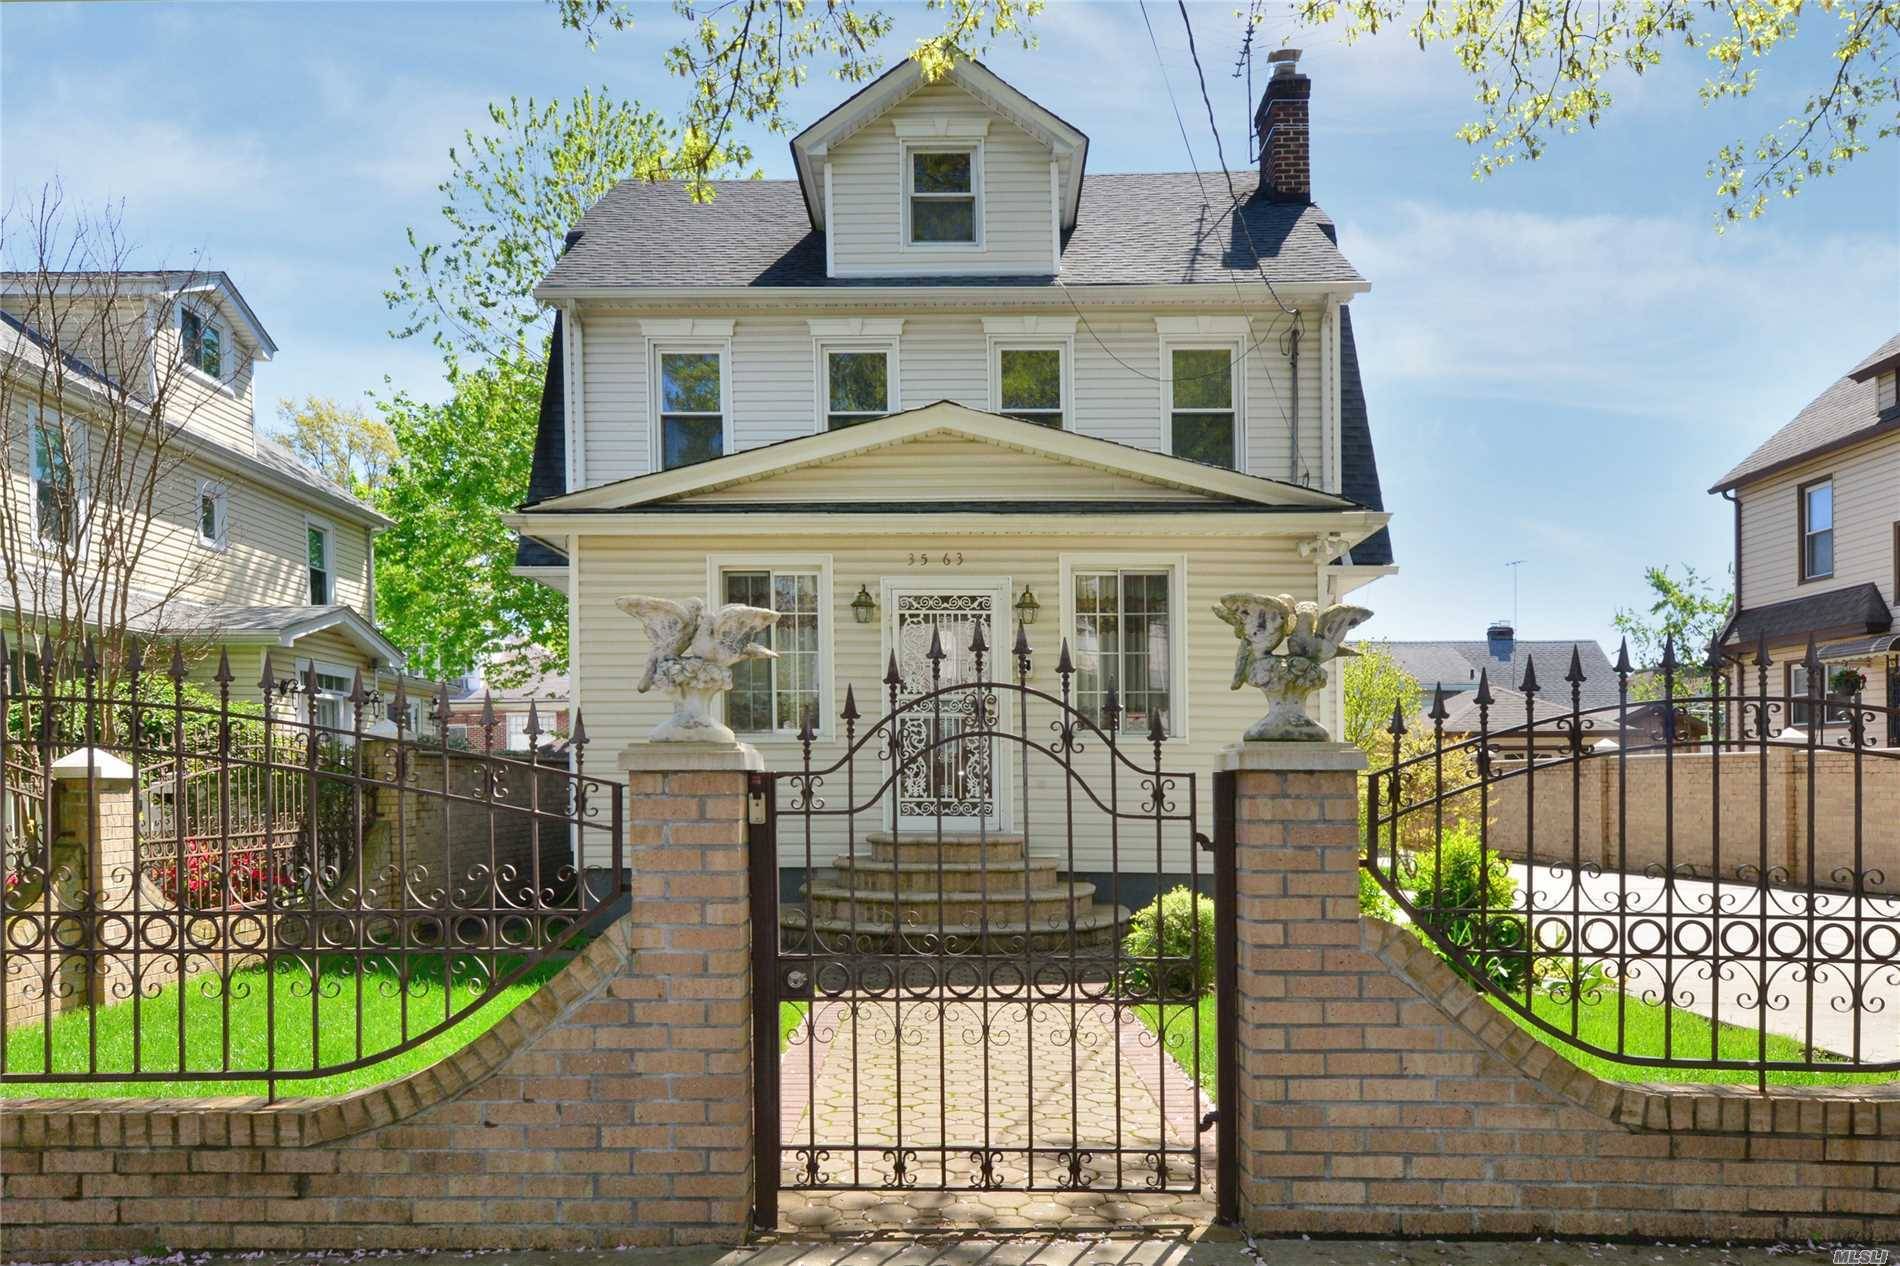 Spacious 5 Bedroom, 2 Full Bath Detached Colonial located on Quiet Treelined Street in the Heart of Prime North Flushing.